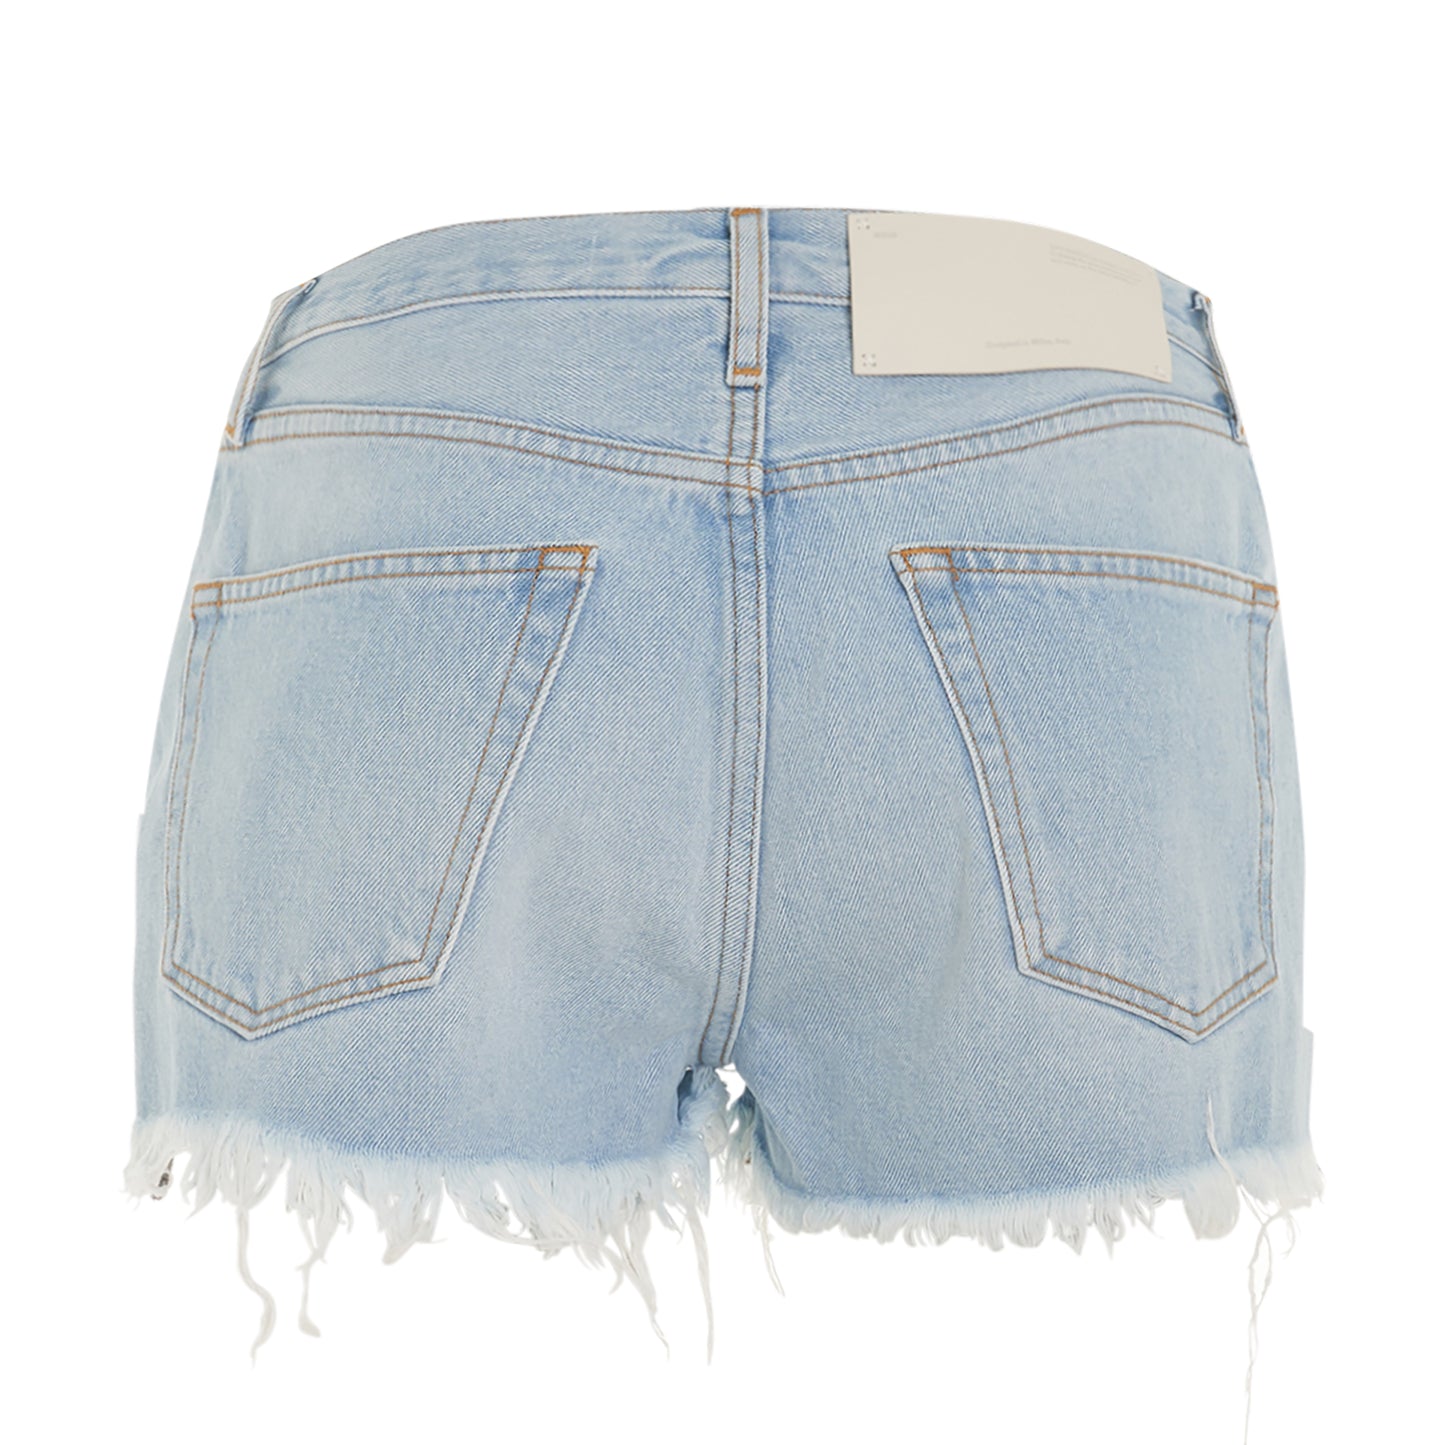 Twisted Bleach Seams Shorts in Light Blue